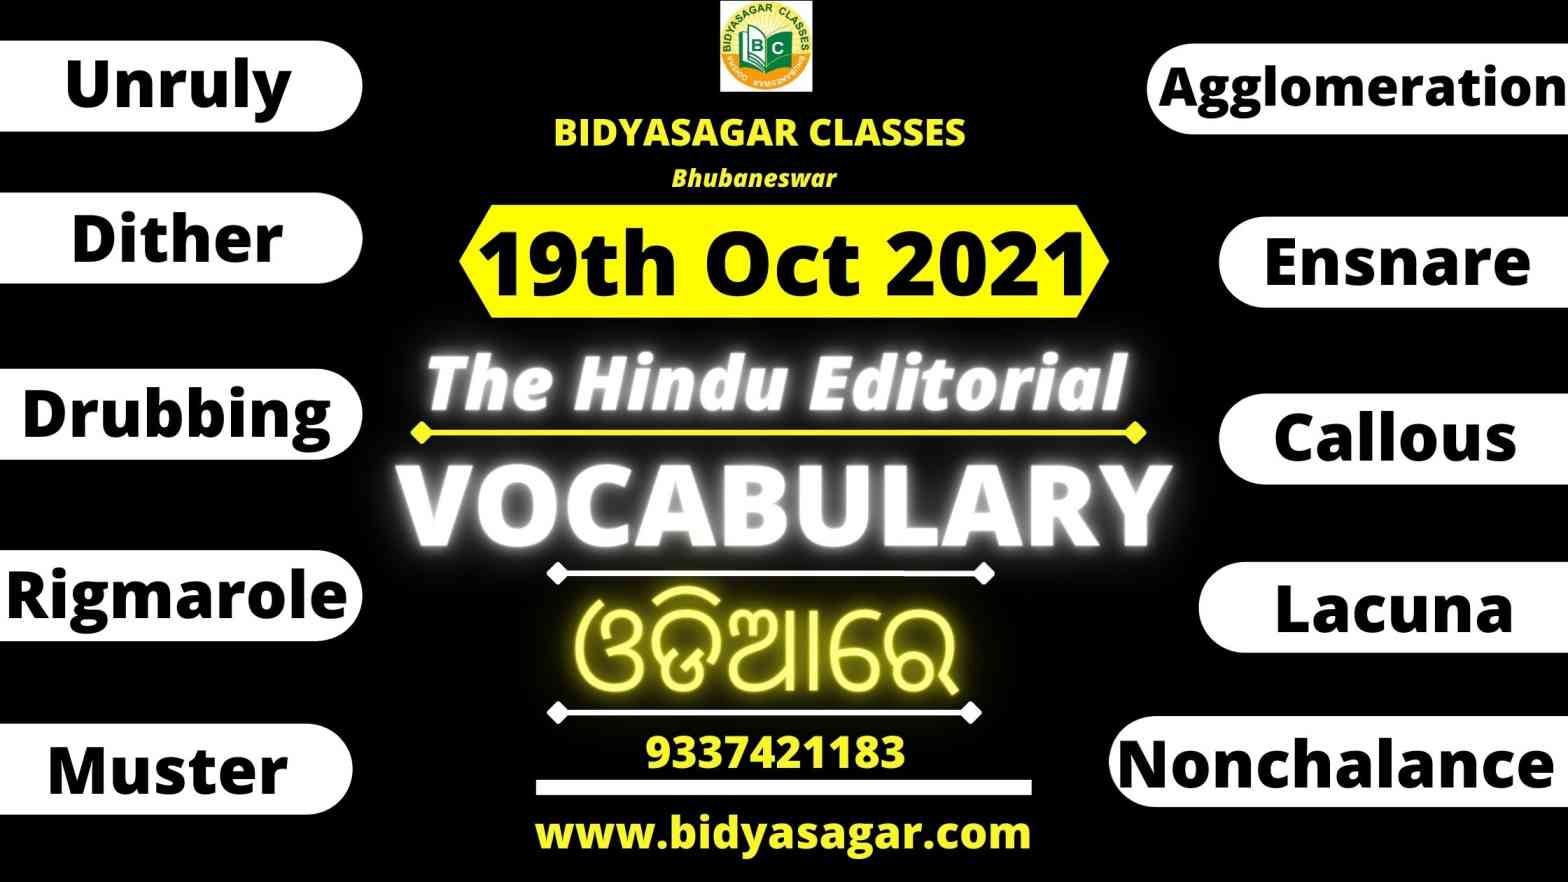 The Hindu Editorial Vocabulary of 19th October 2021